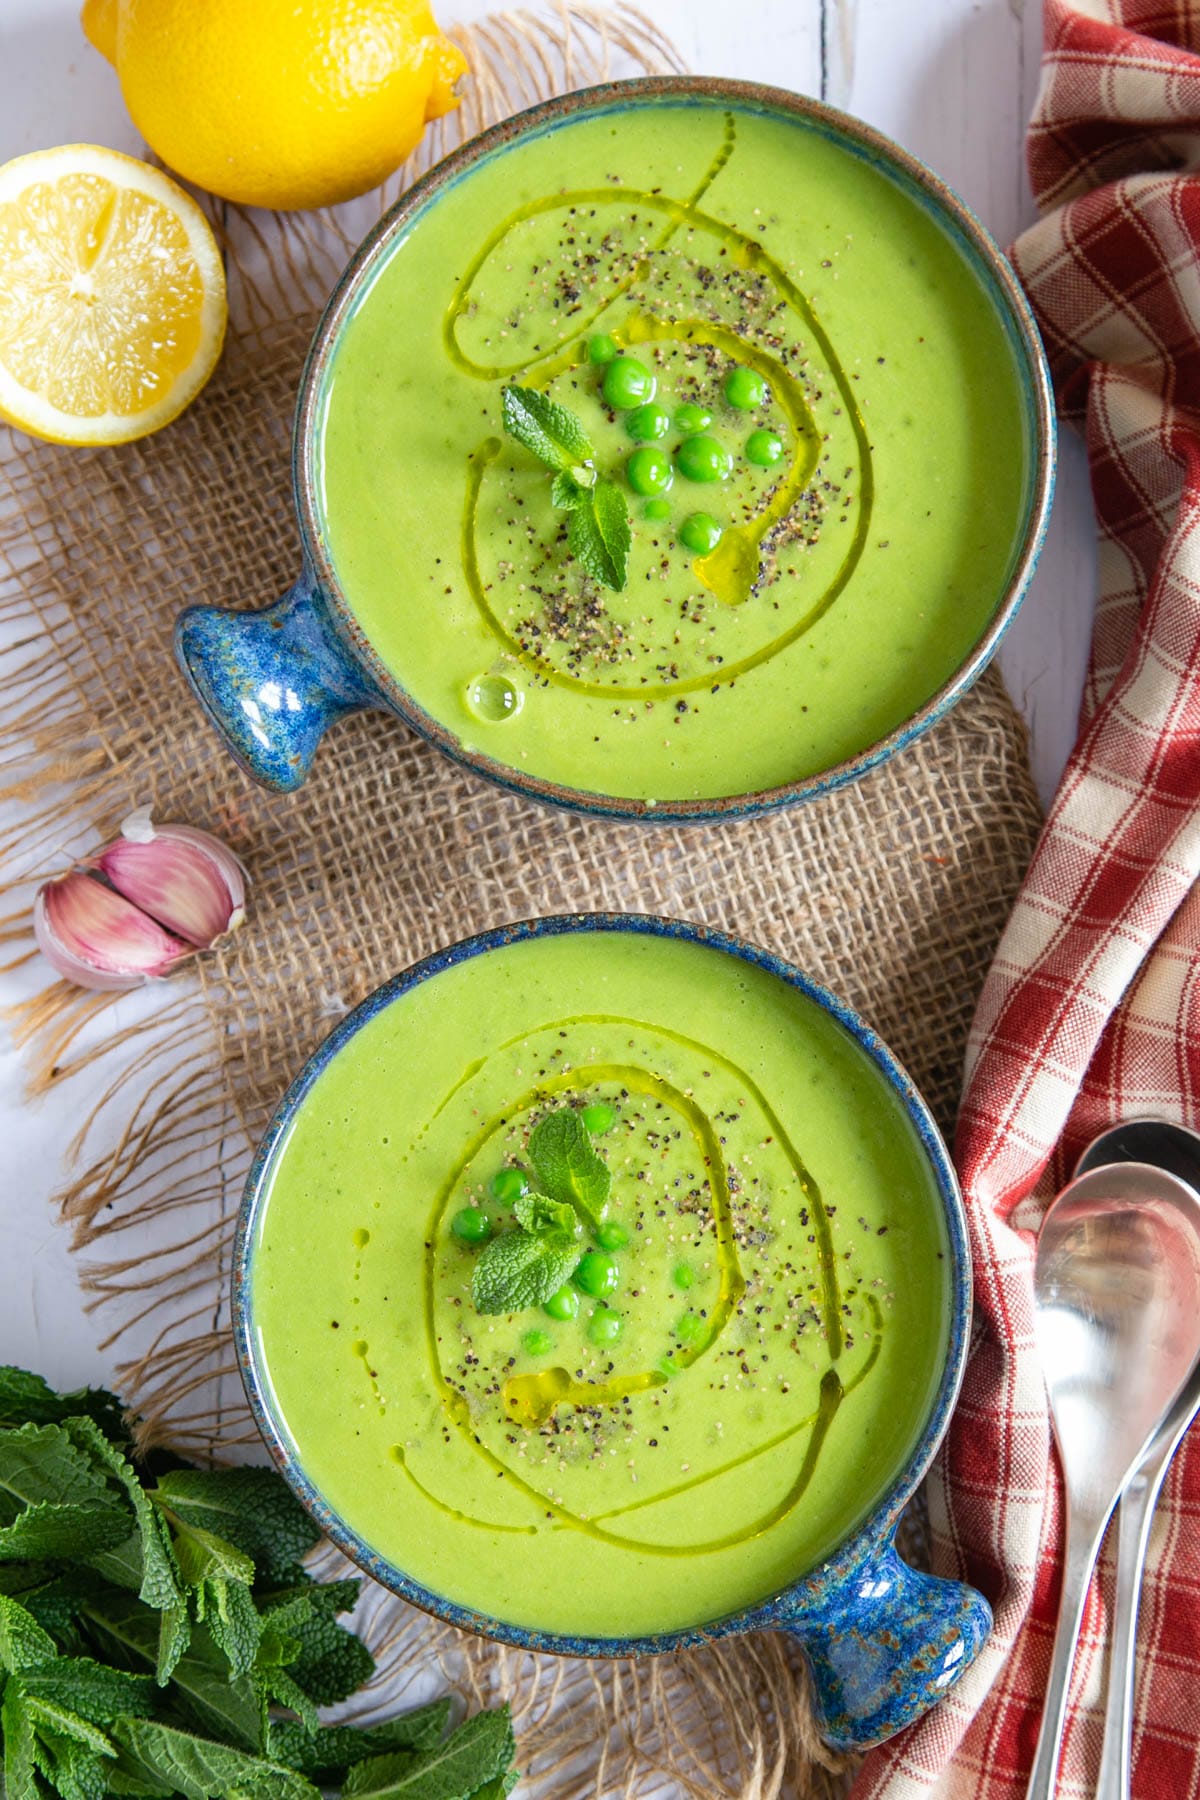 This zesty green pea and mint soup looking inviting served in contrasting bowls.